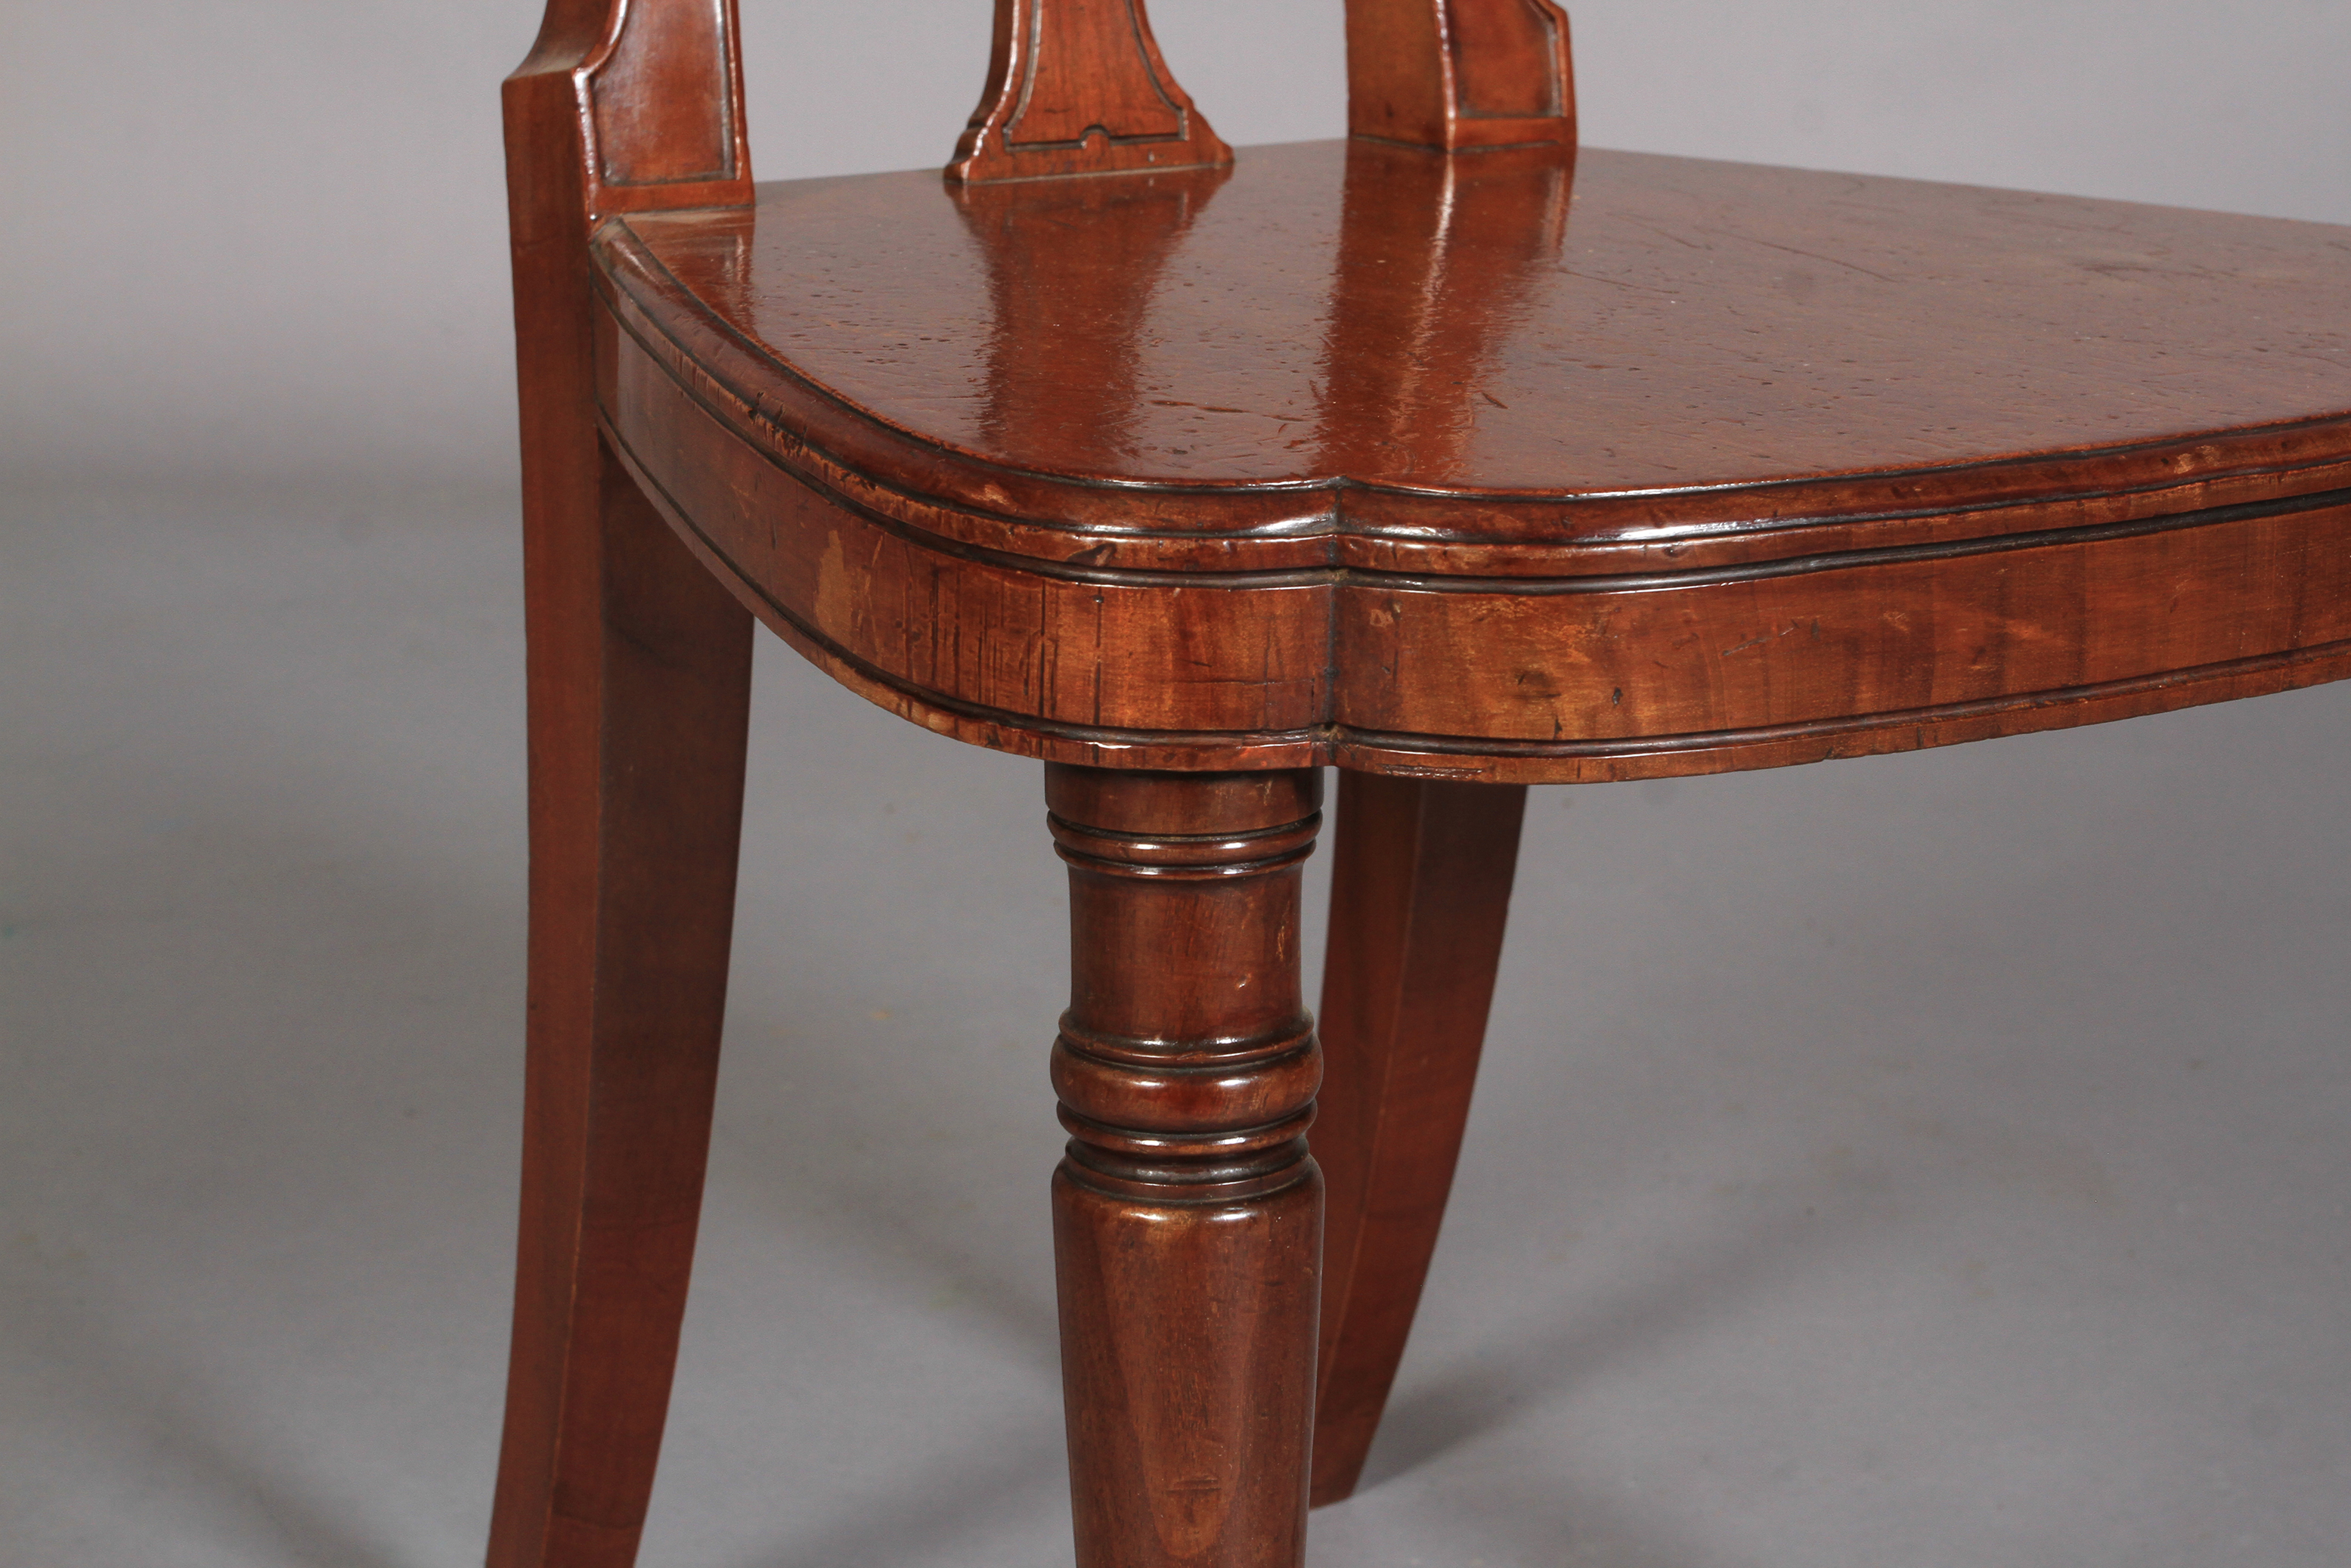 A GEORGE IV MAHOGANY HALL CHAIR with swag and splat back, on slender turned legs - Image 3 of 4